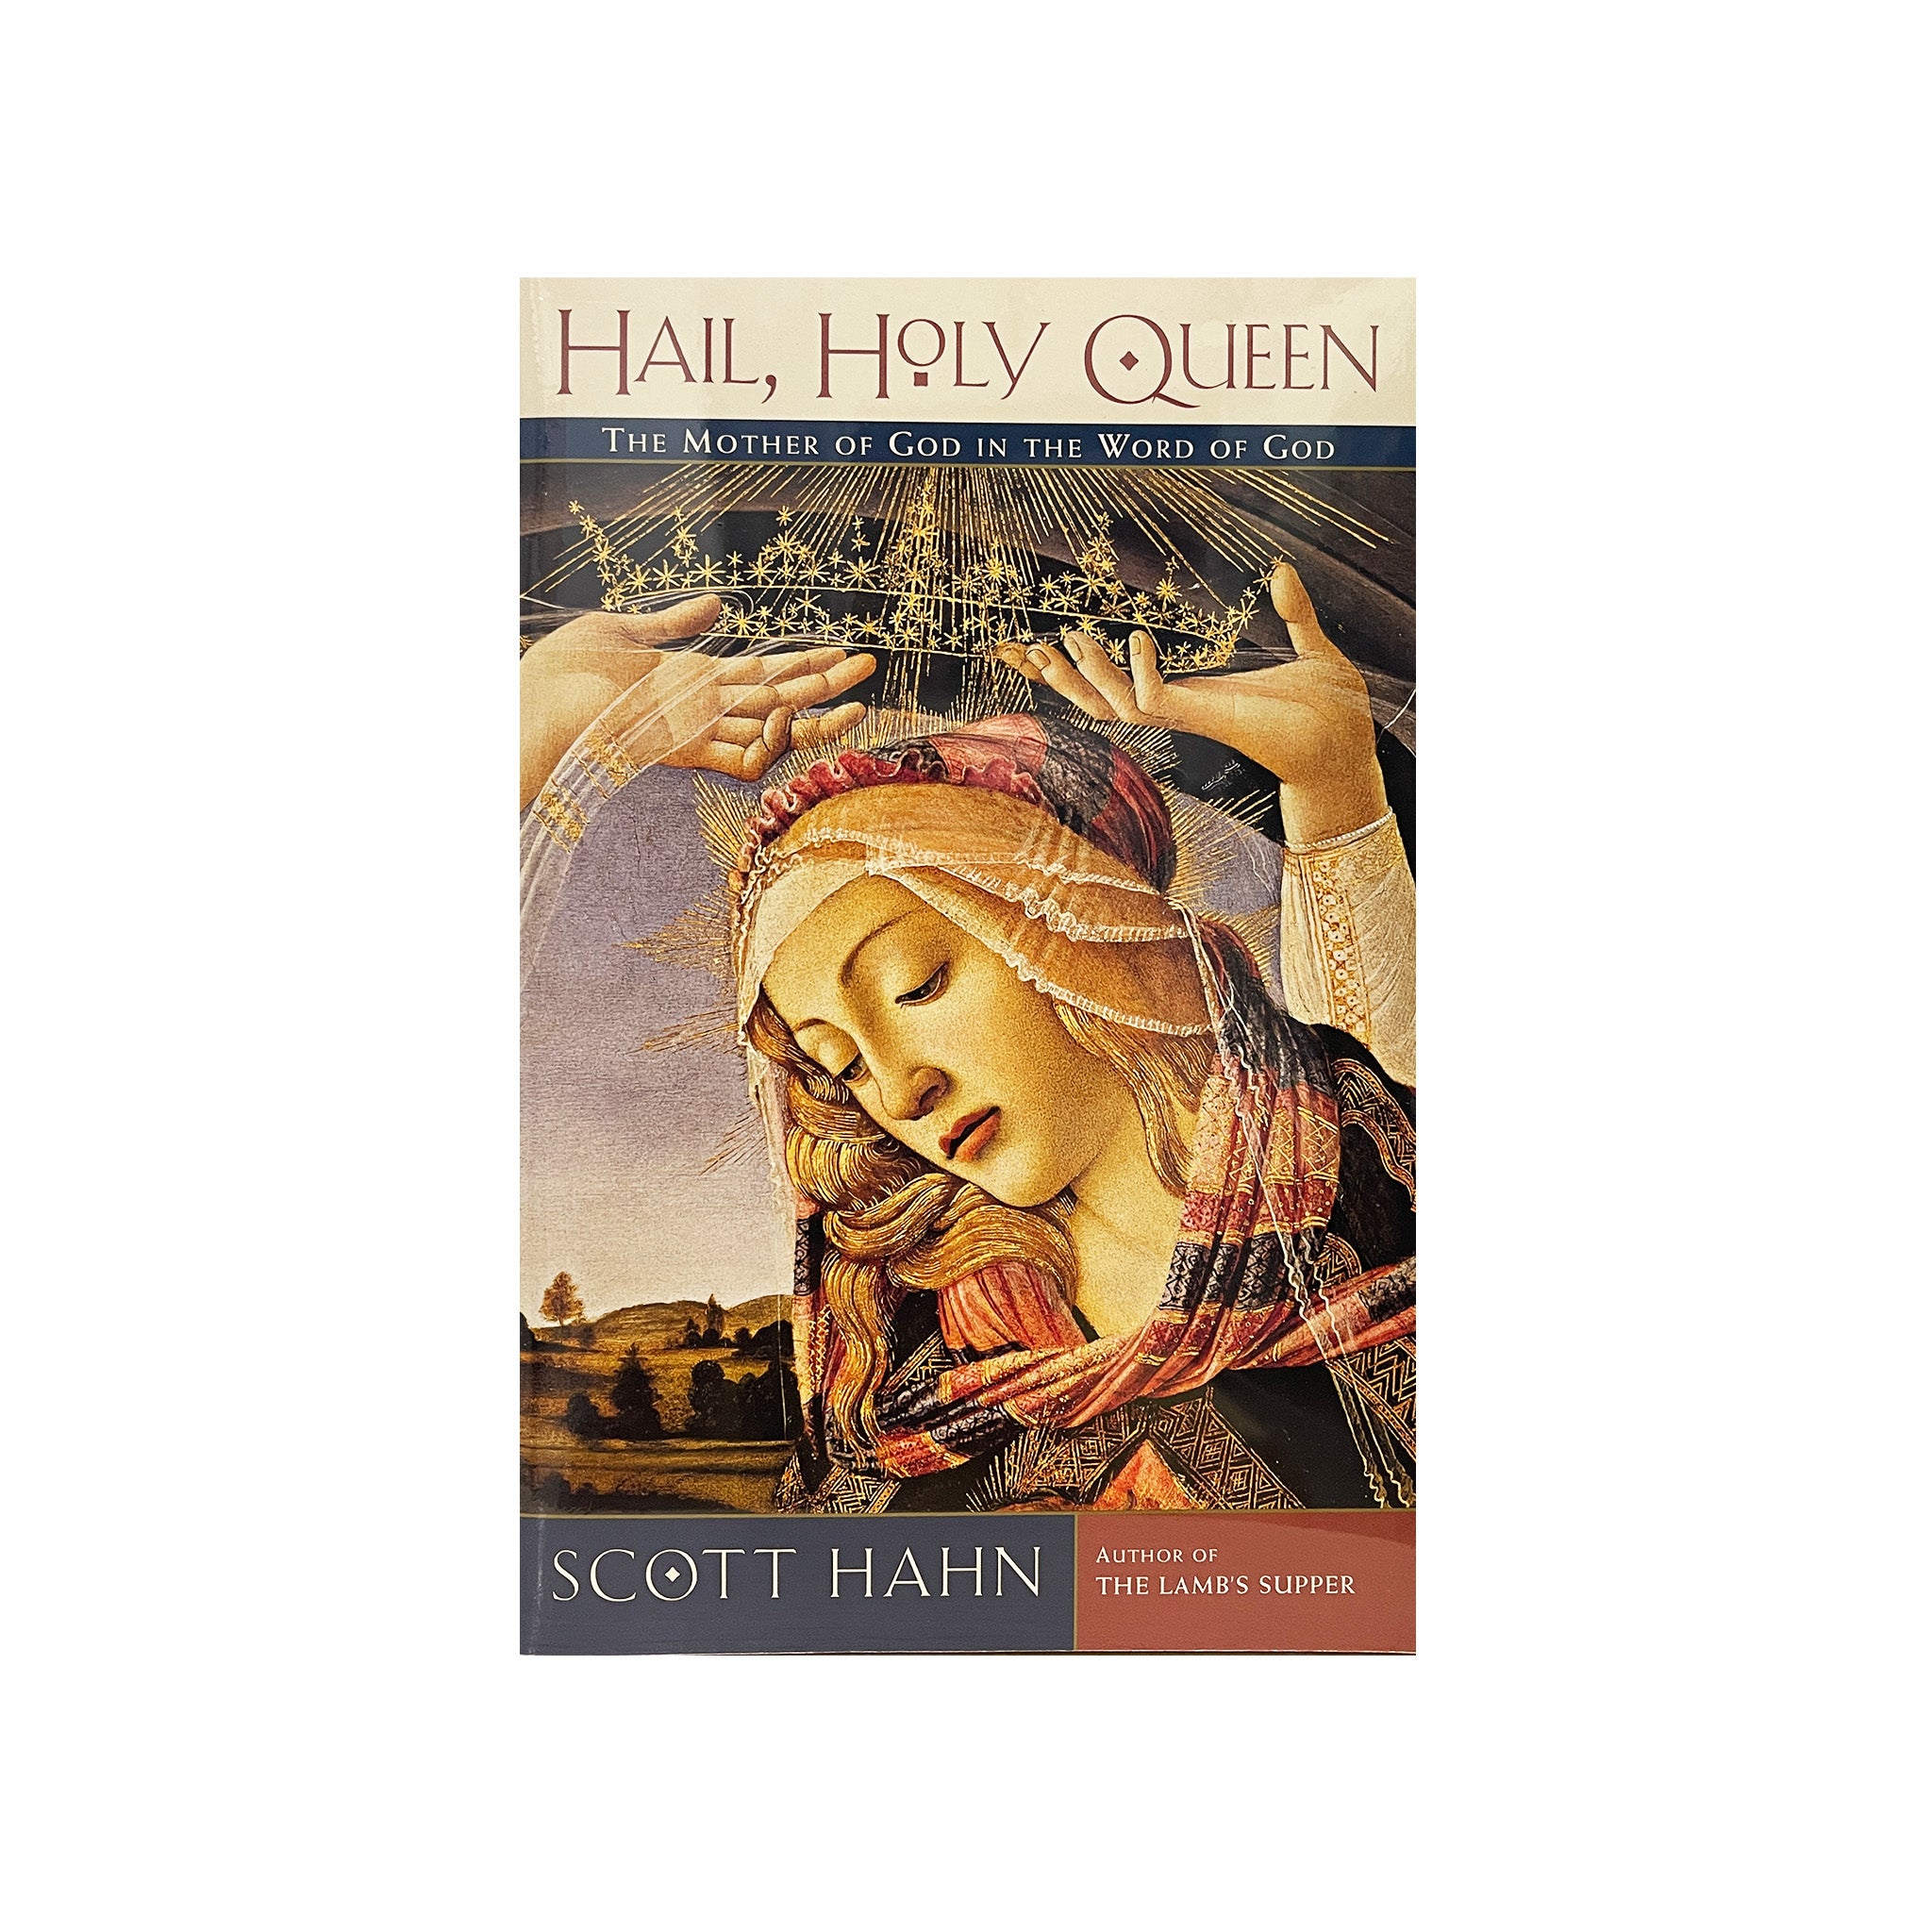 HAIL, HOLY QUEEN: THE MOTHER OF GOD IN THE WORD OF GOD